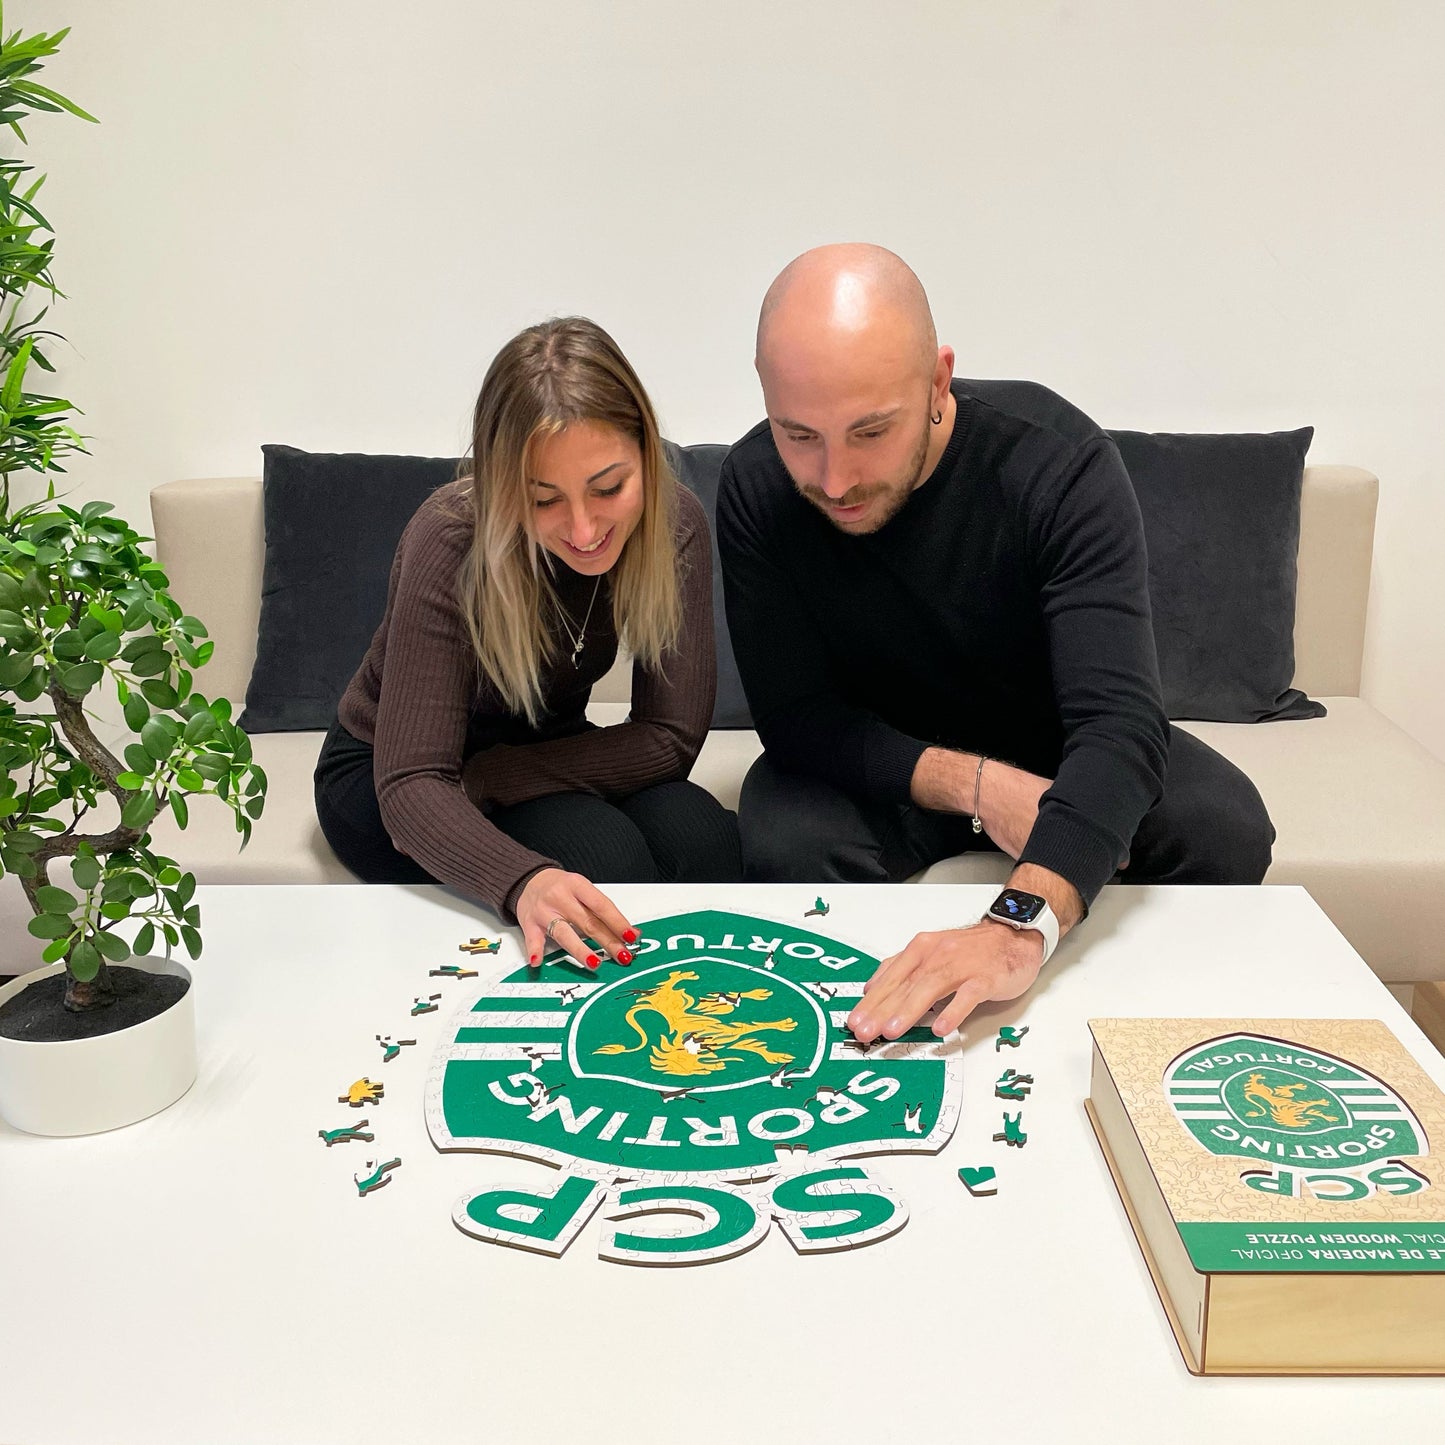 Sporting CP® Jersey - Wooden Puzzle